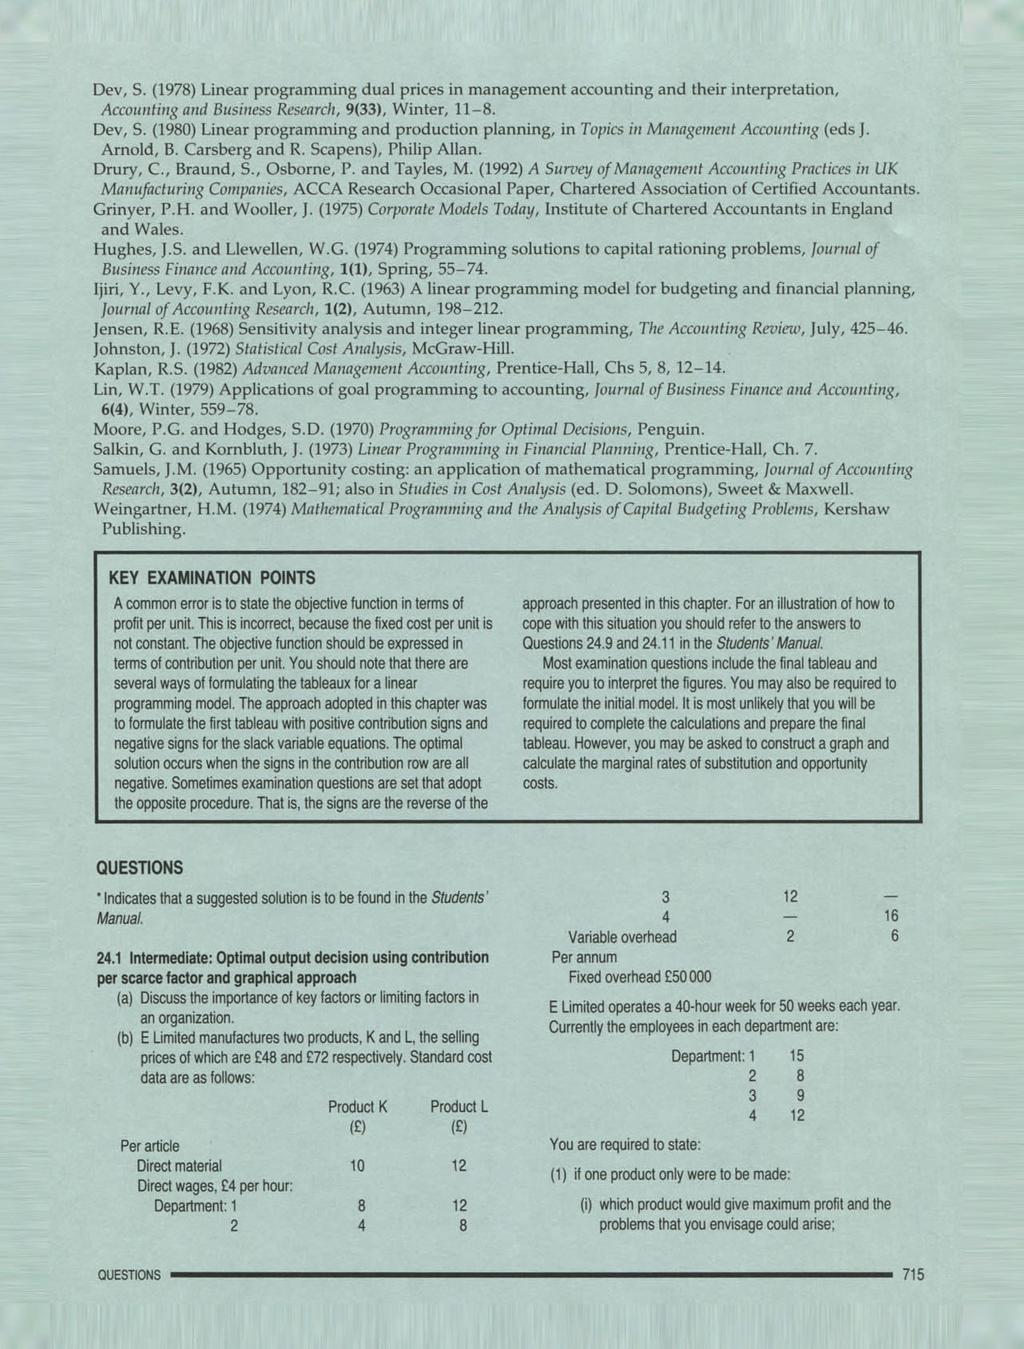 Dev, S. (1978) Linear programming dual prices in management accounting and their interpretation, Accounting and Business Research, 9(33), Winter, 11-8. Dev, S.